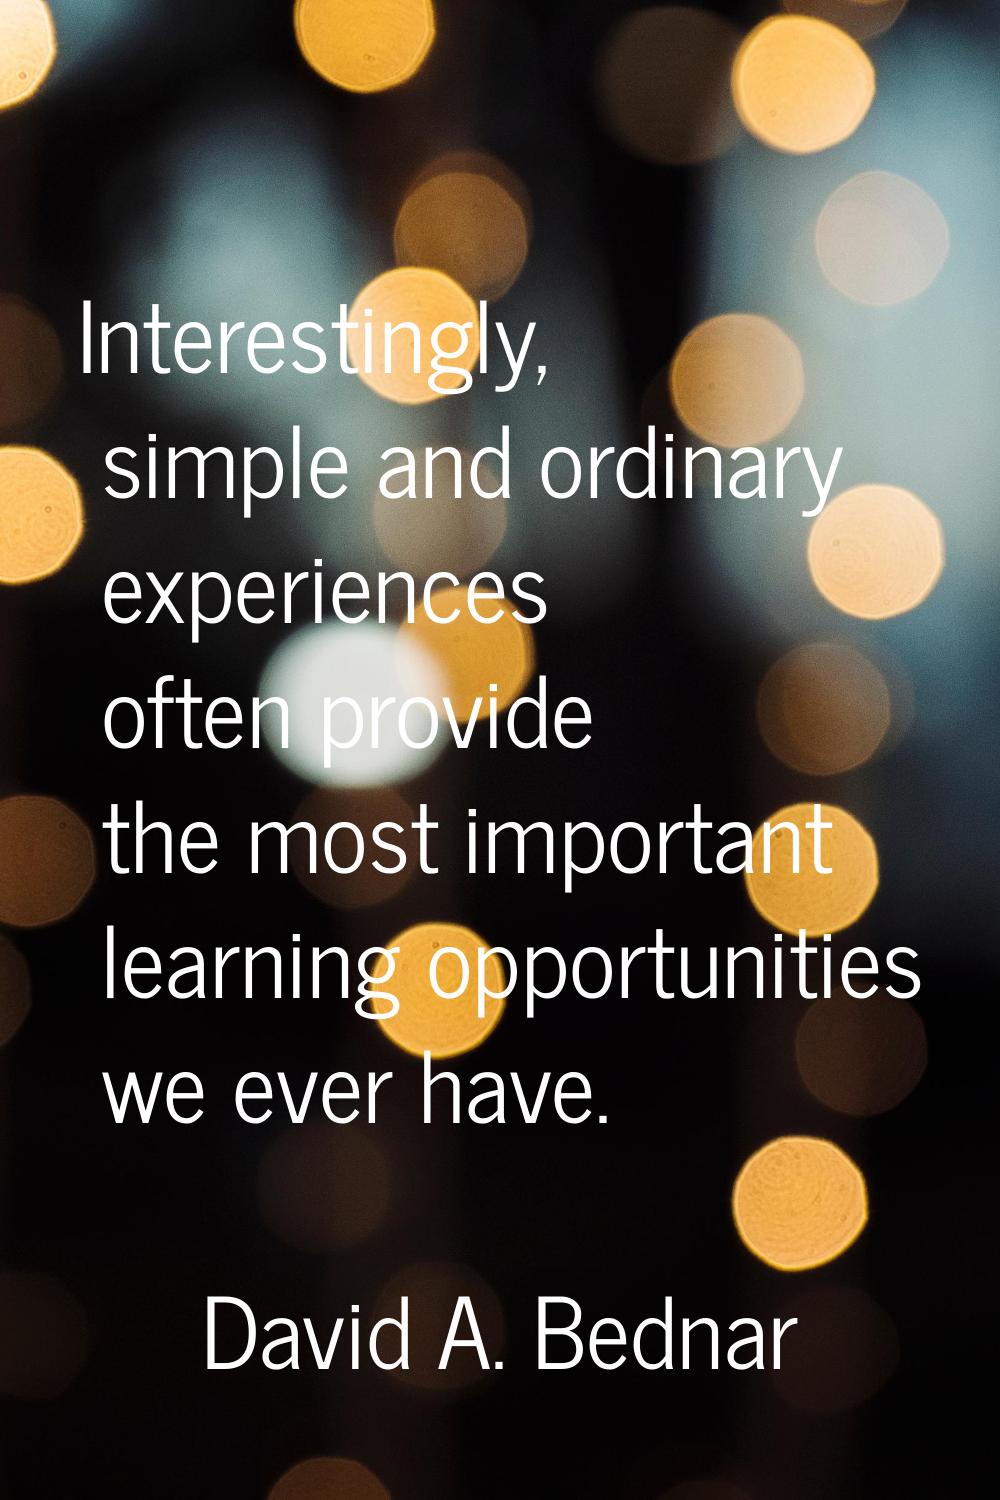 Interestingly, simple and ordinary experiences often provide the most important learning opportunit